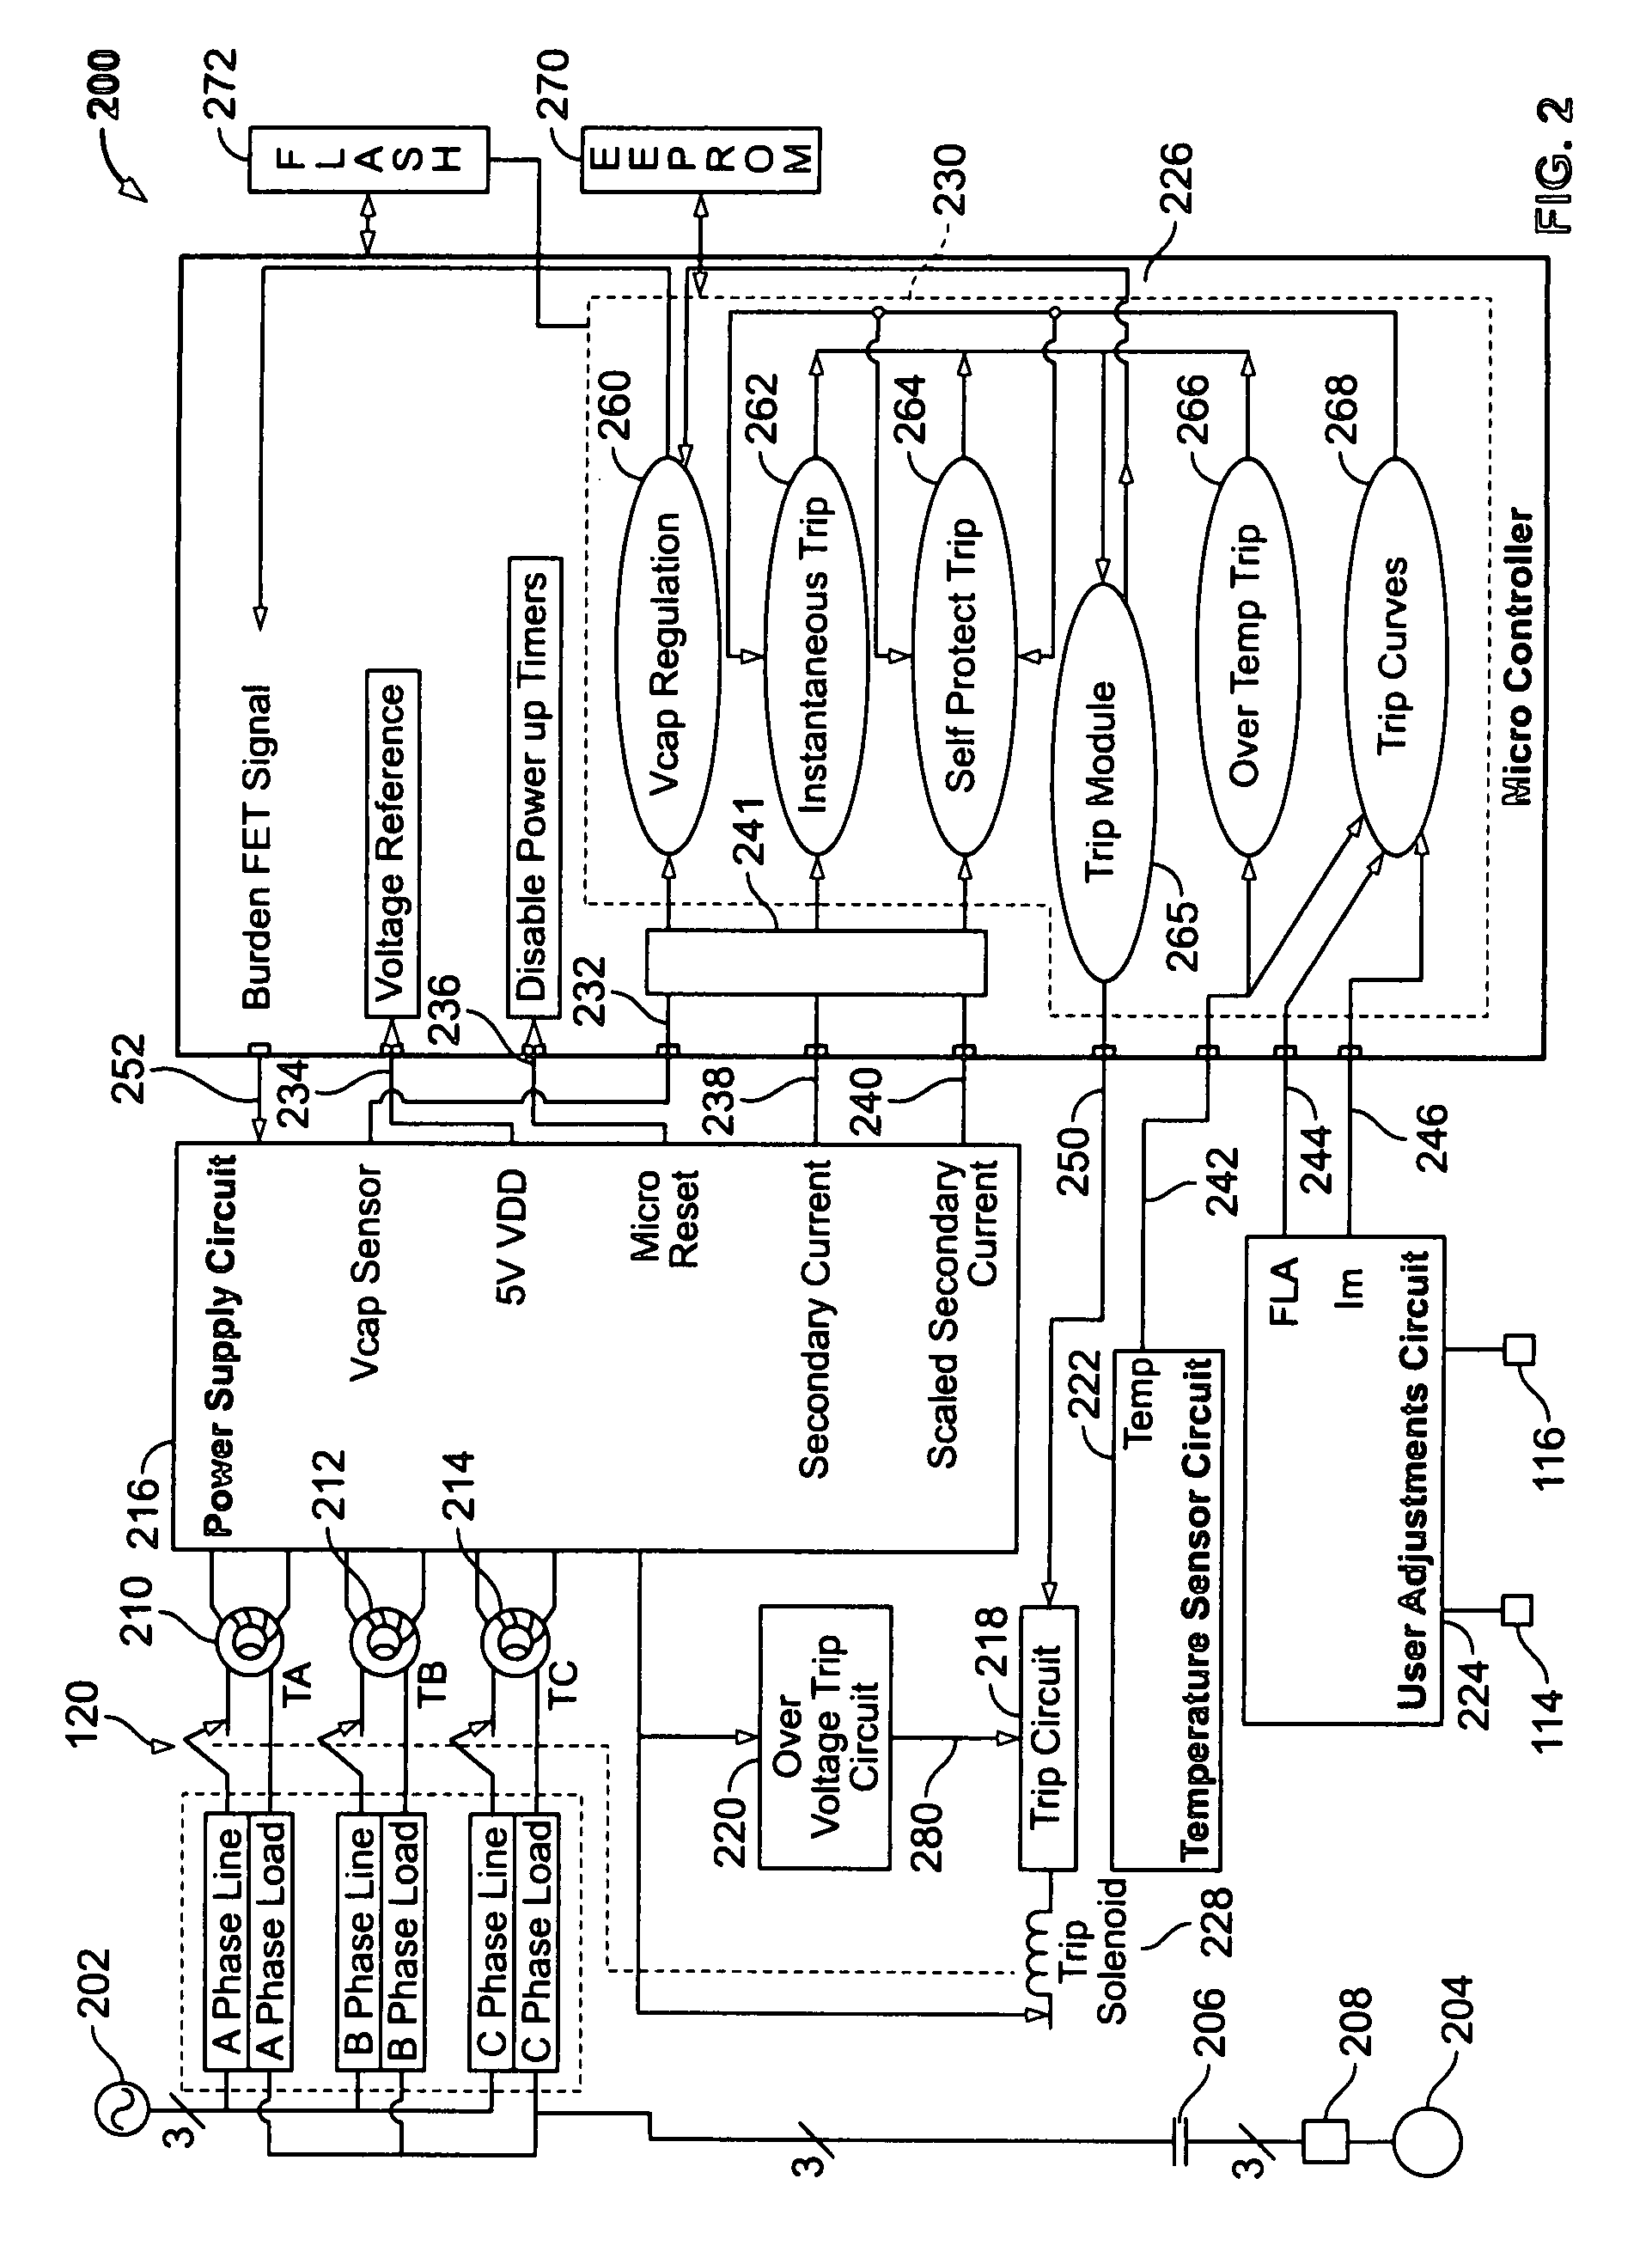 Circuit breaker-like apparatus with combination current transformer